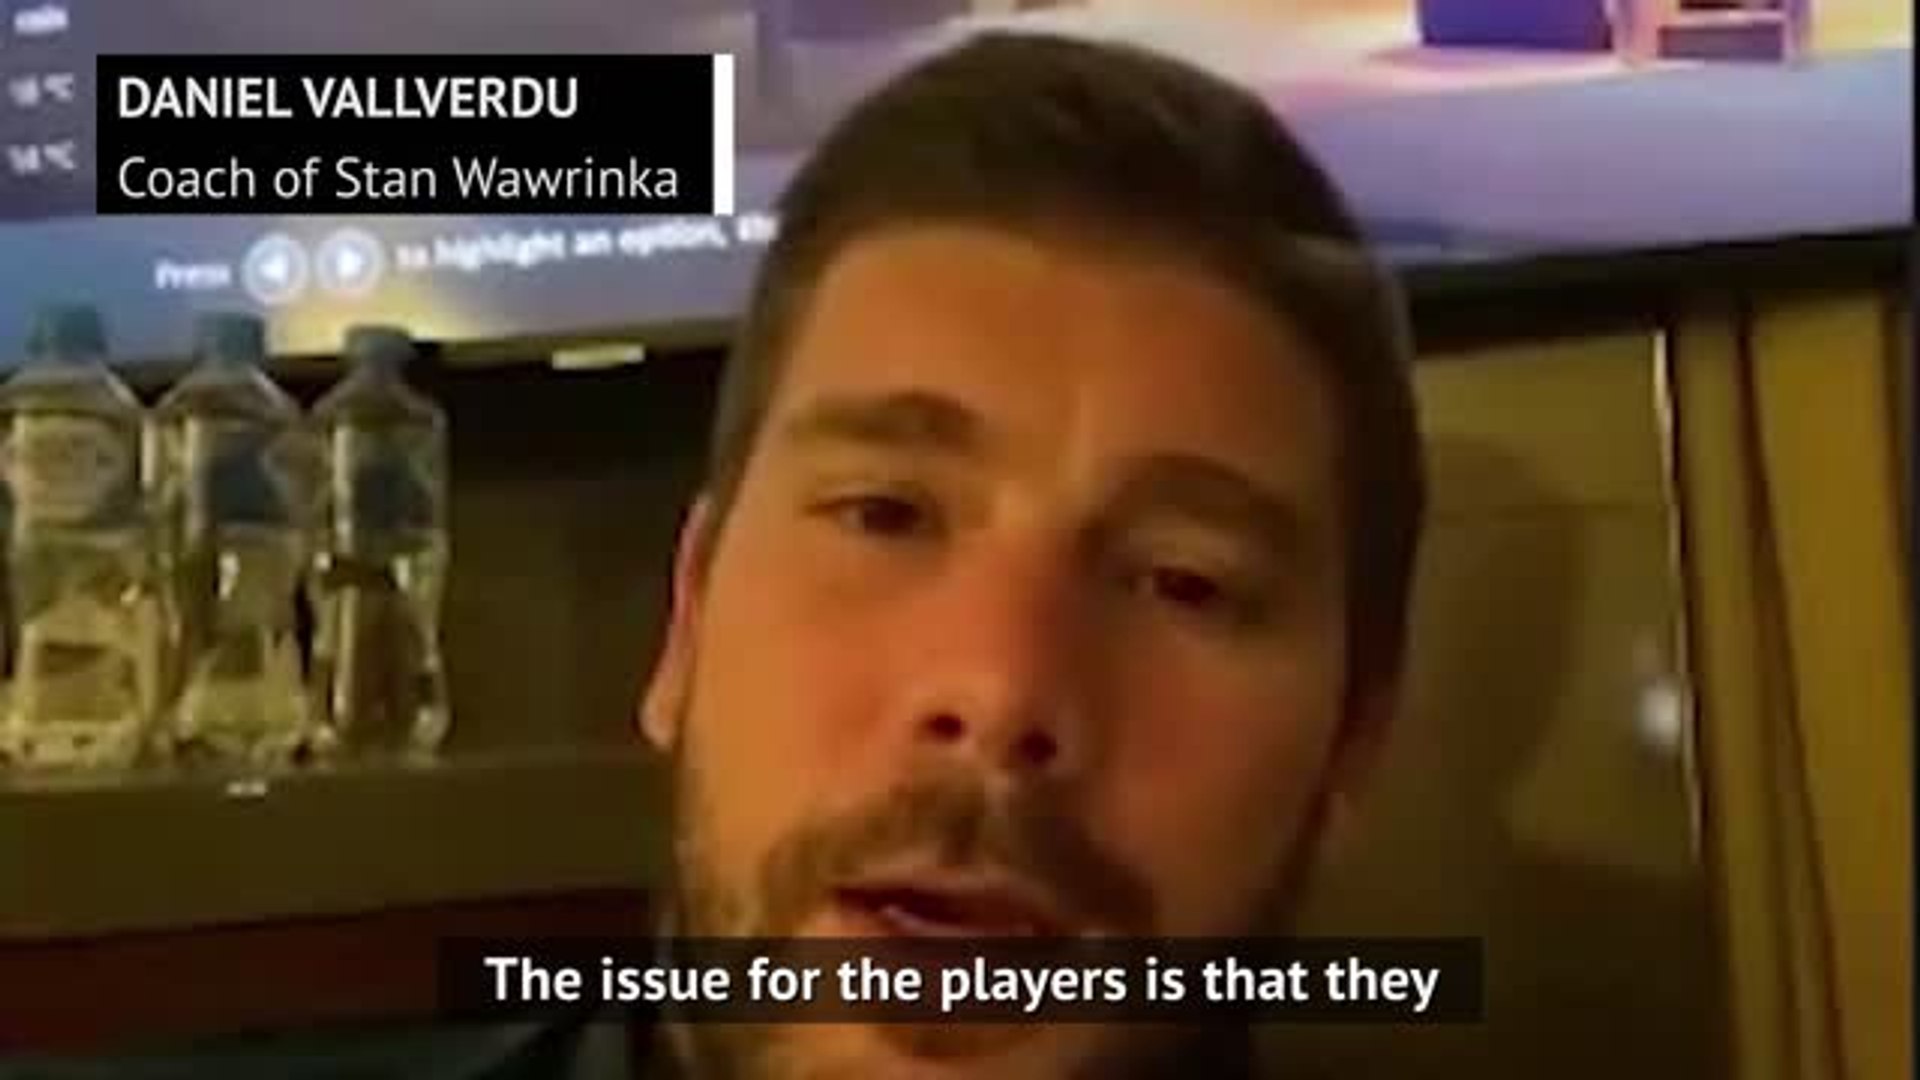 Players frustrated at inability to train - Wawrinka coach Vallverdu - video  Dailymotion